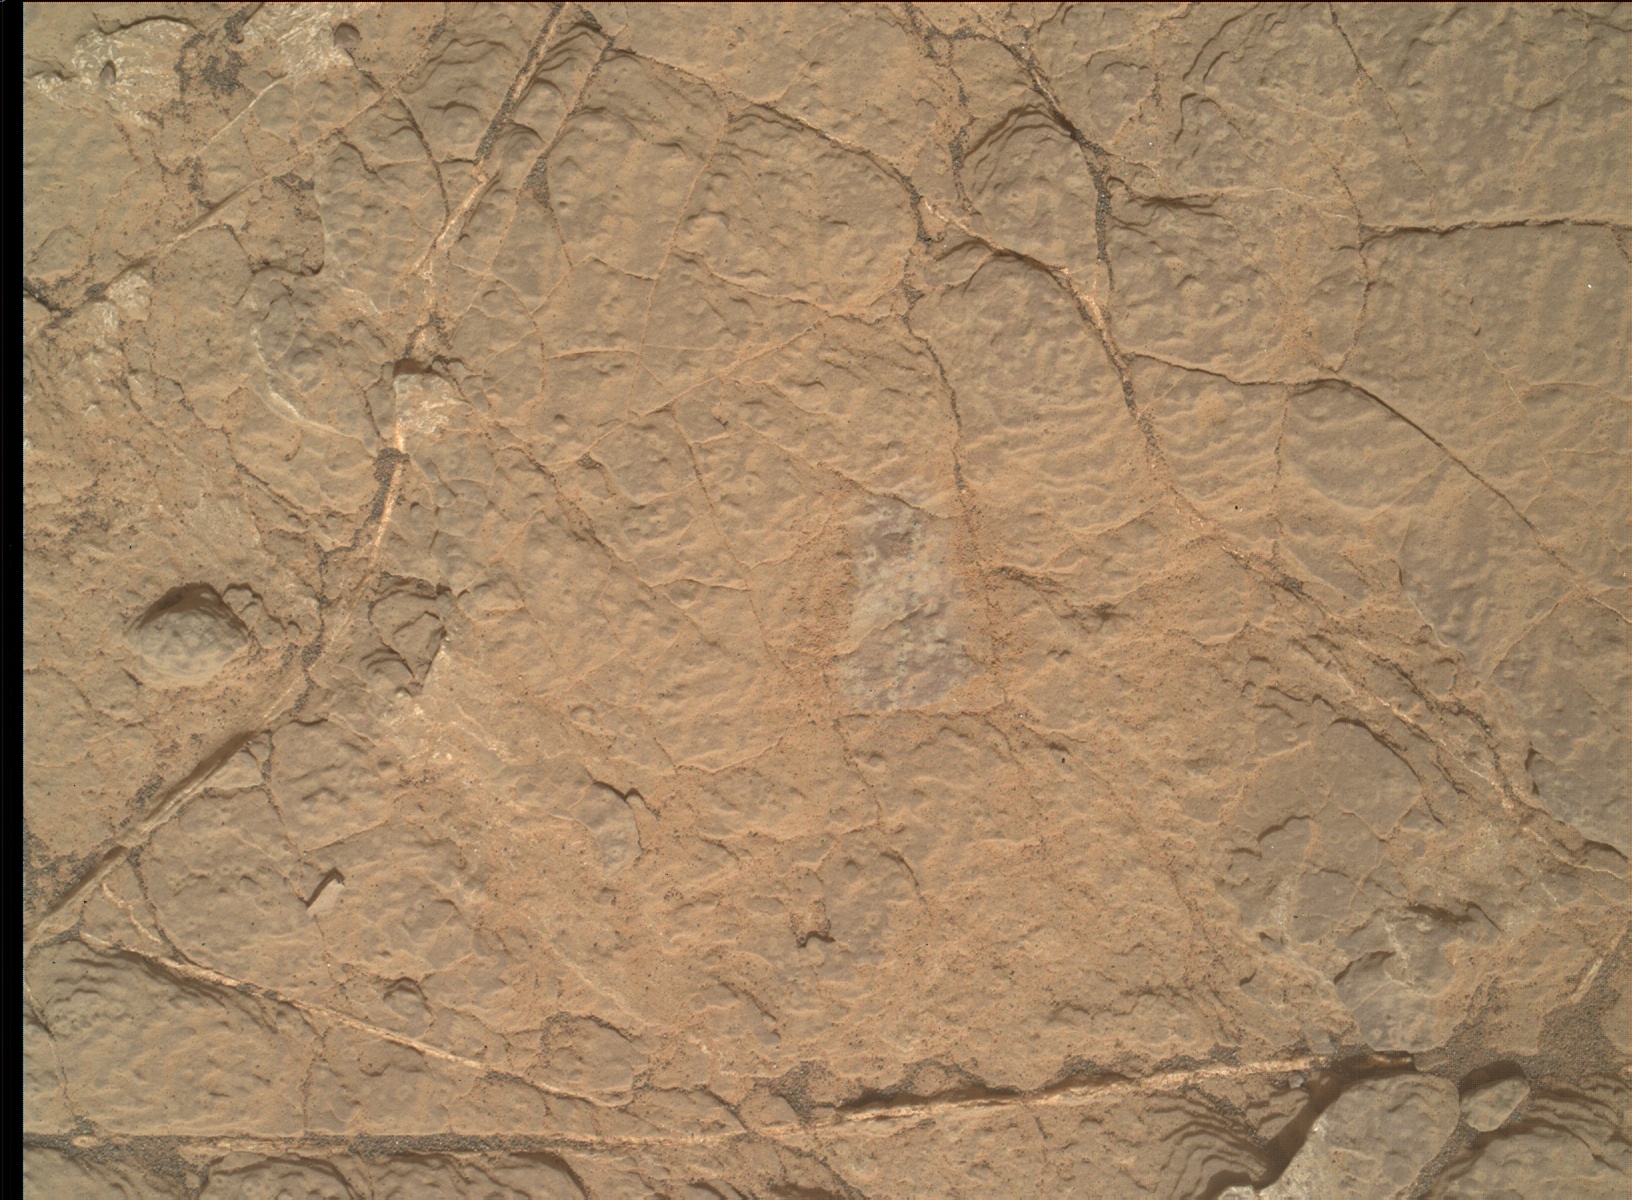 Nasa's Mars rover Curiosity acquired this image using its Mars Hand Lens Imager (MAHLI) on Sol 2792